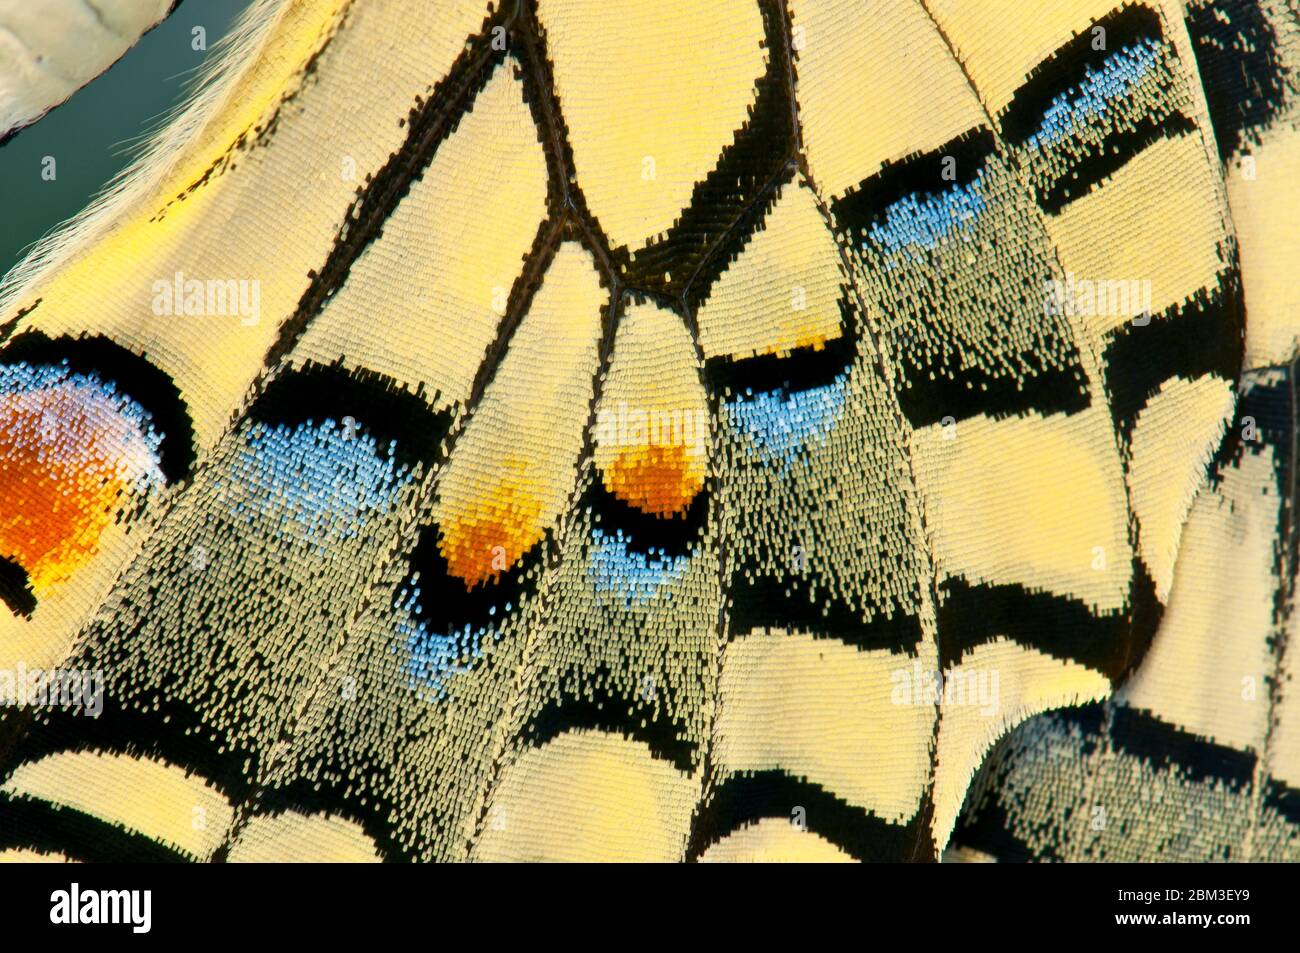 Swallowtail butterfly wing, close-up Banque D'Images